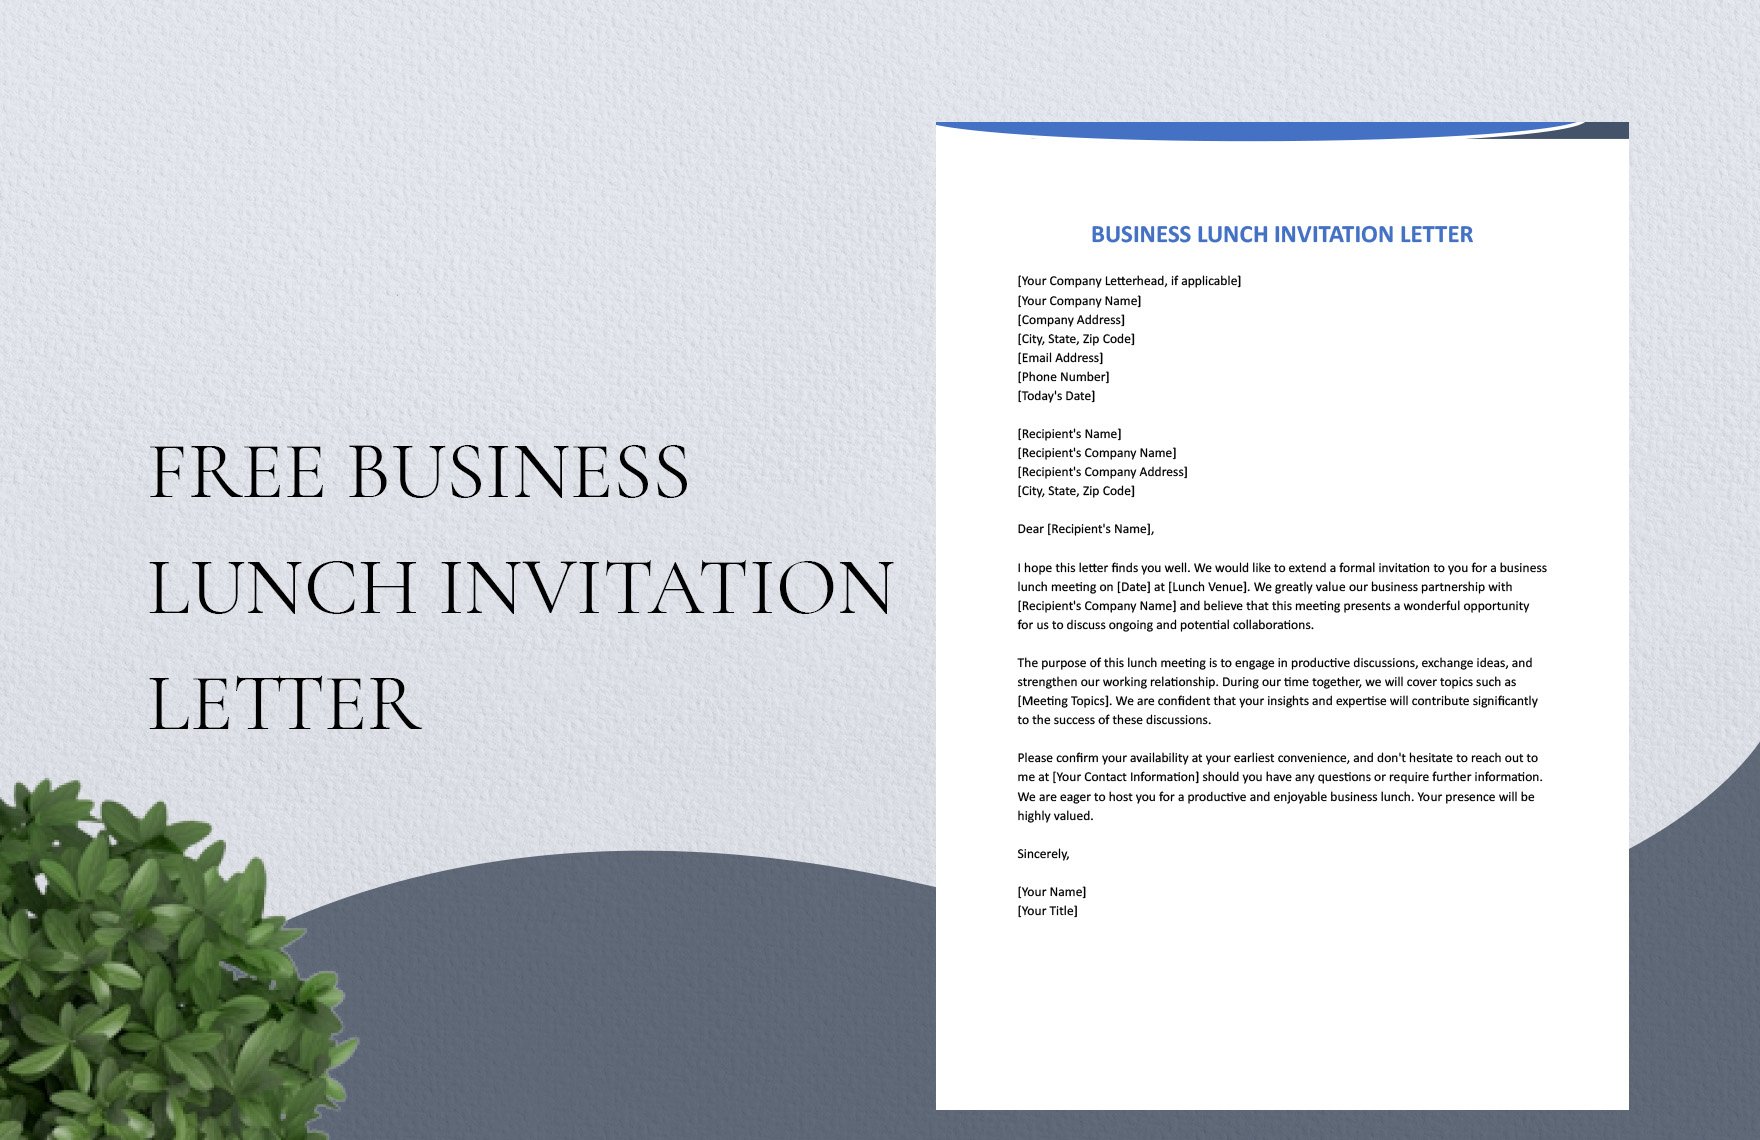 Business Lunch Invitation Letter